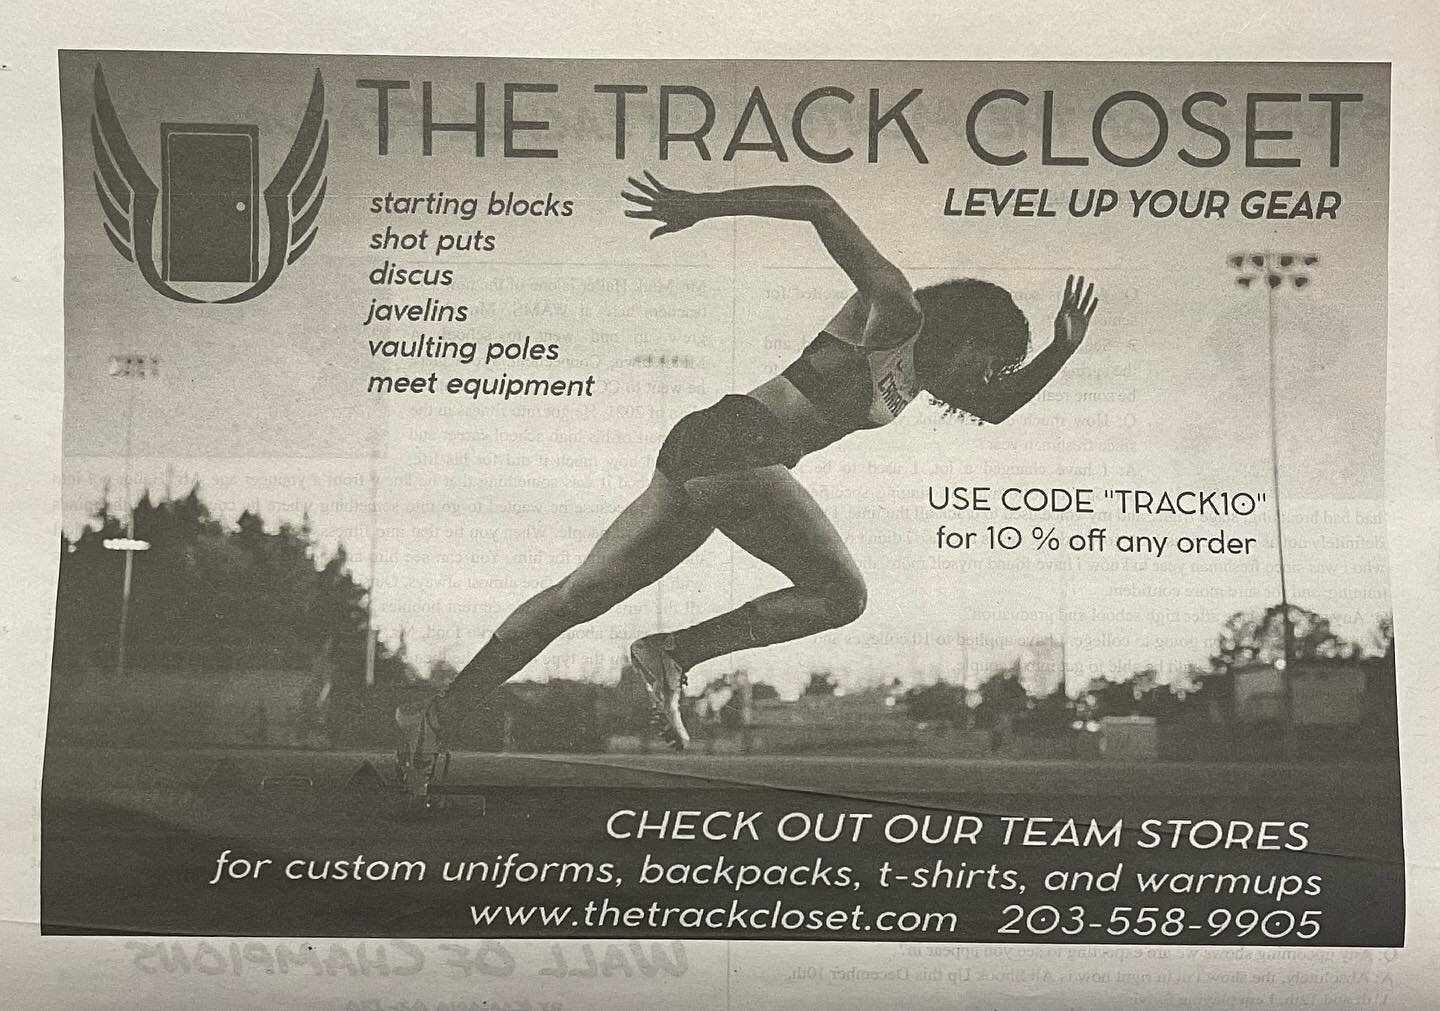 FEATURED IN TODAYS PAPER!!

It&rsquo;s the start of track season!! Check out our website for all your track and field needs Link in bio

#trackandfield #tracknation #trackcloset #tracknfield #highschooltrack #cttrack #smallbusiness #smallbusinesssatu